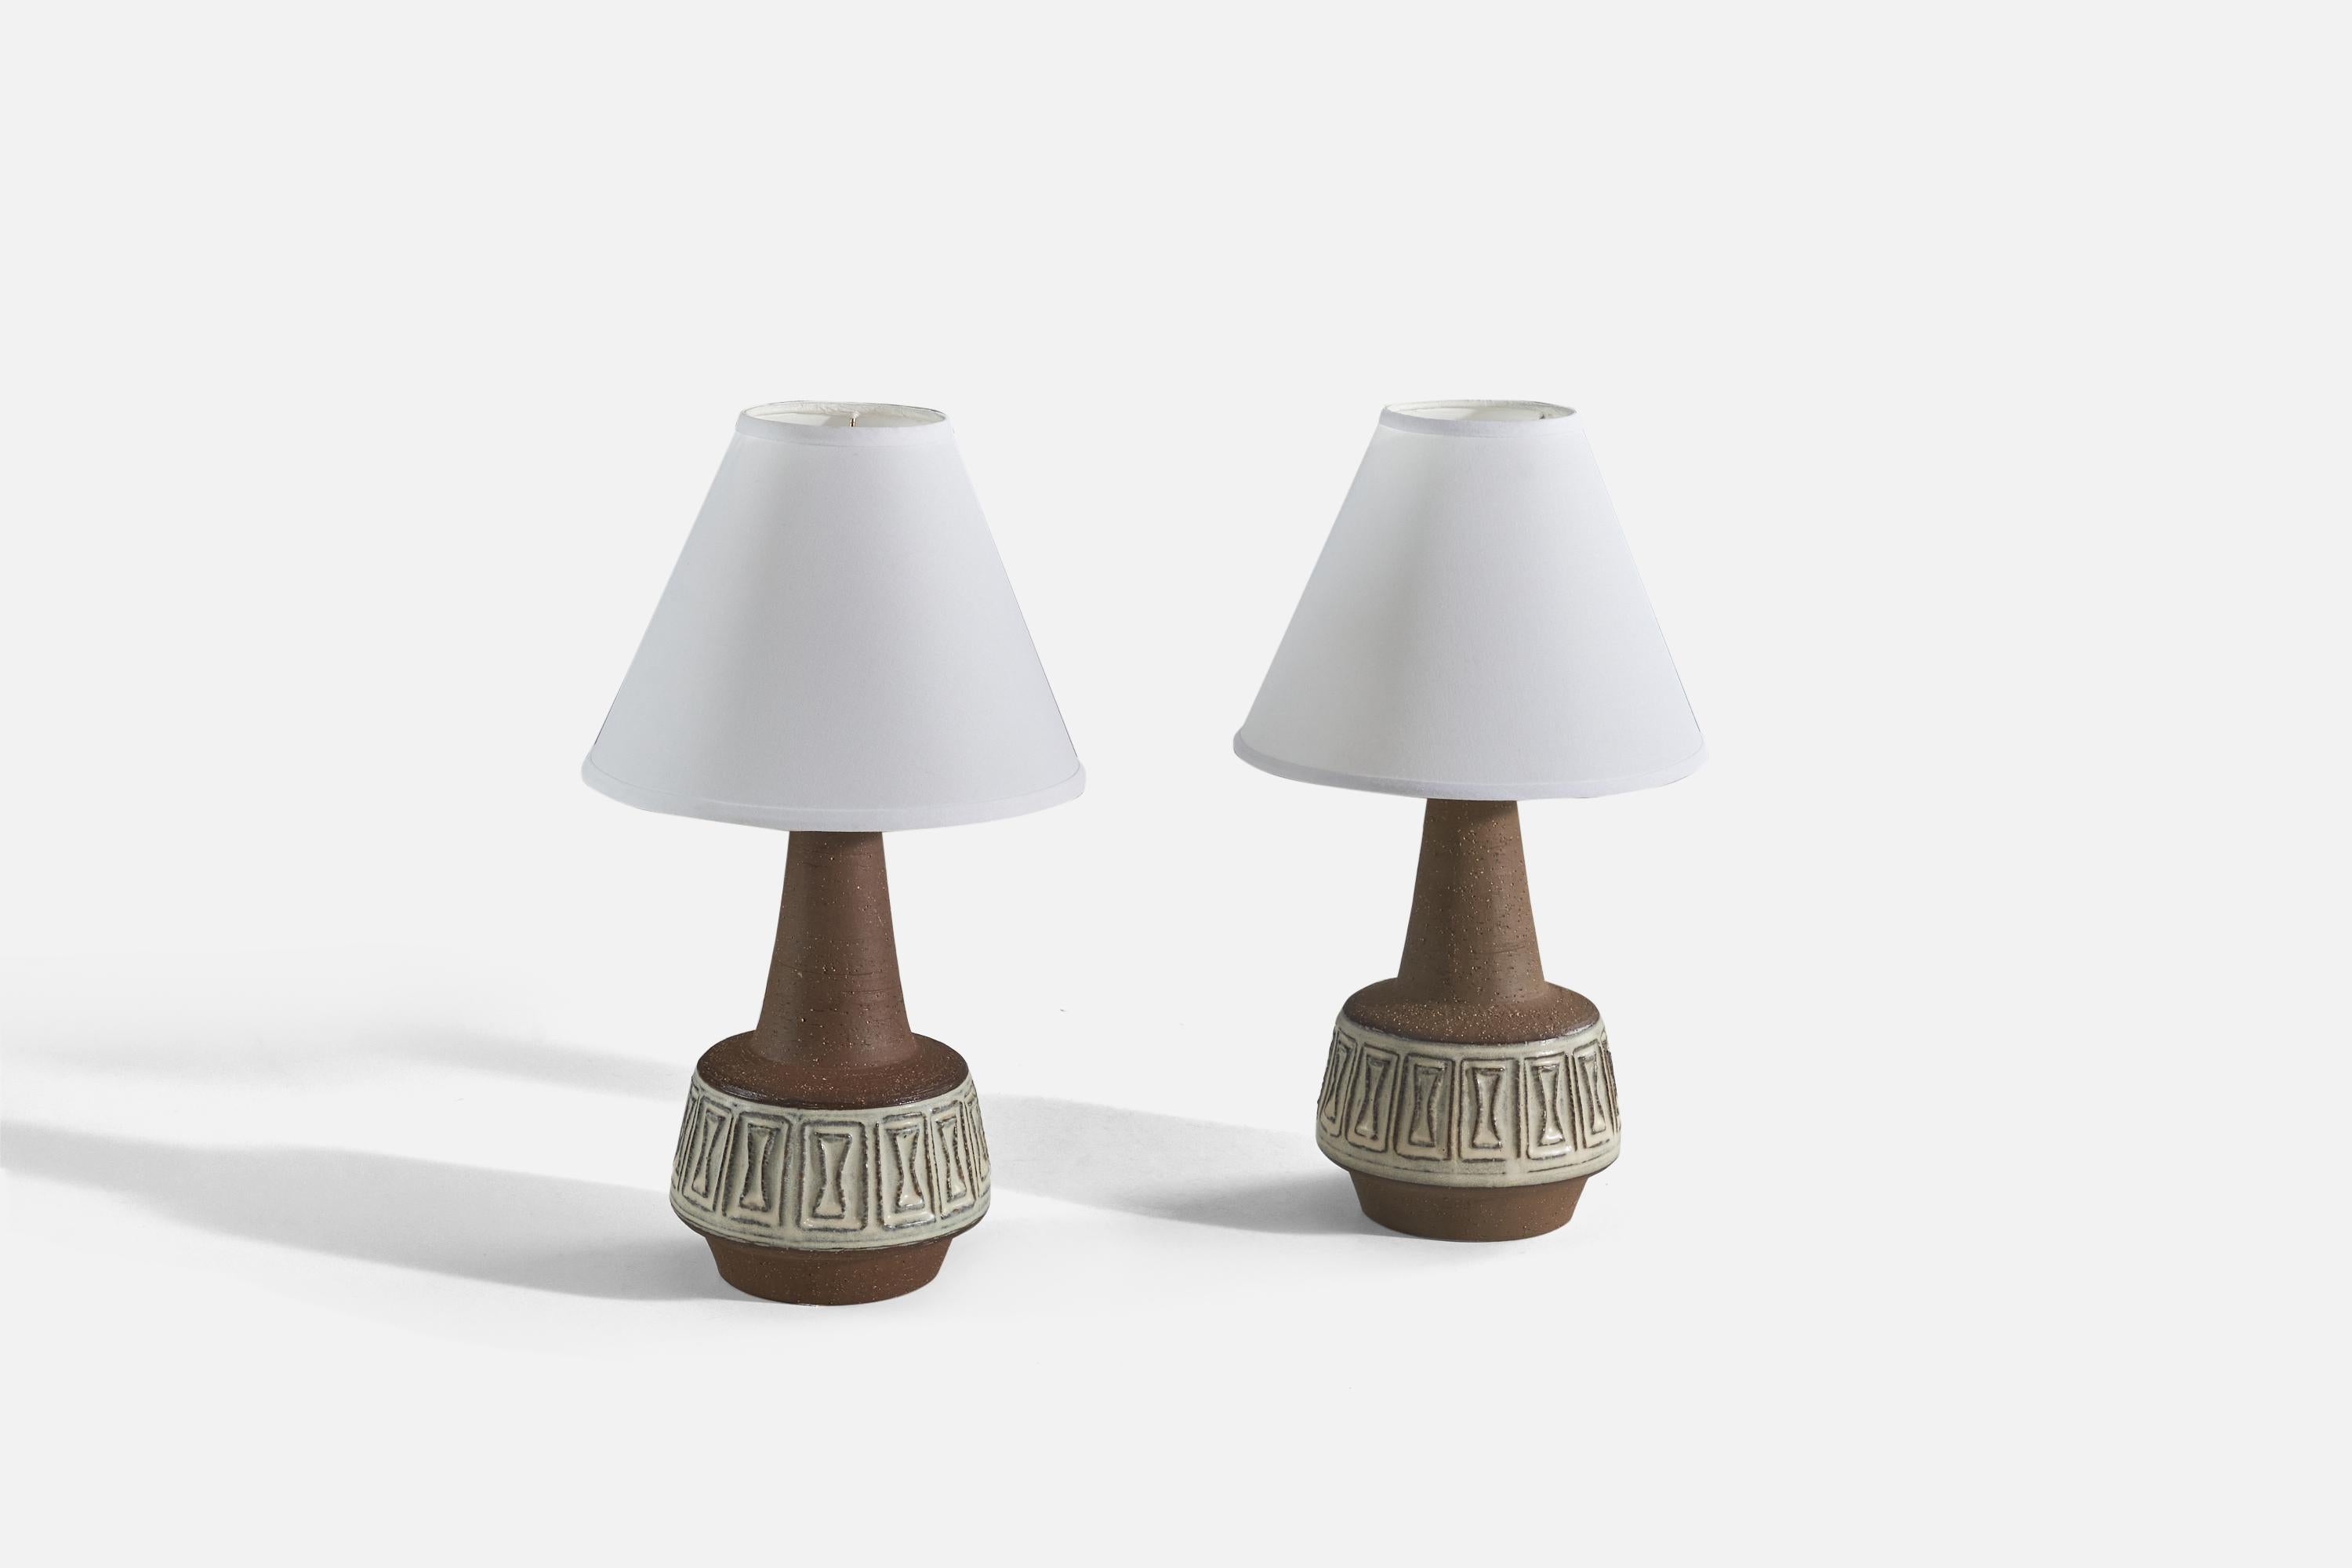 A pair of brown, glazed stoneware table lamps designed and produced by Michael Andersen Keramik, Denmark, 1960s. 

Sold without lampshade. 
Dimensions of Lamp (inches) : 13.31 x 6.75 x 6.75 (Height x Width x Depth)
Dimensions of Shade (inches) :